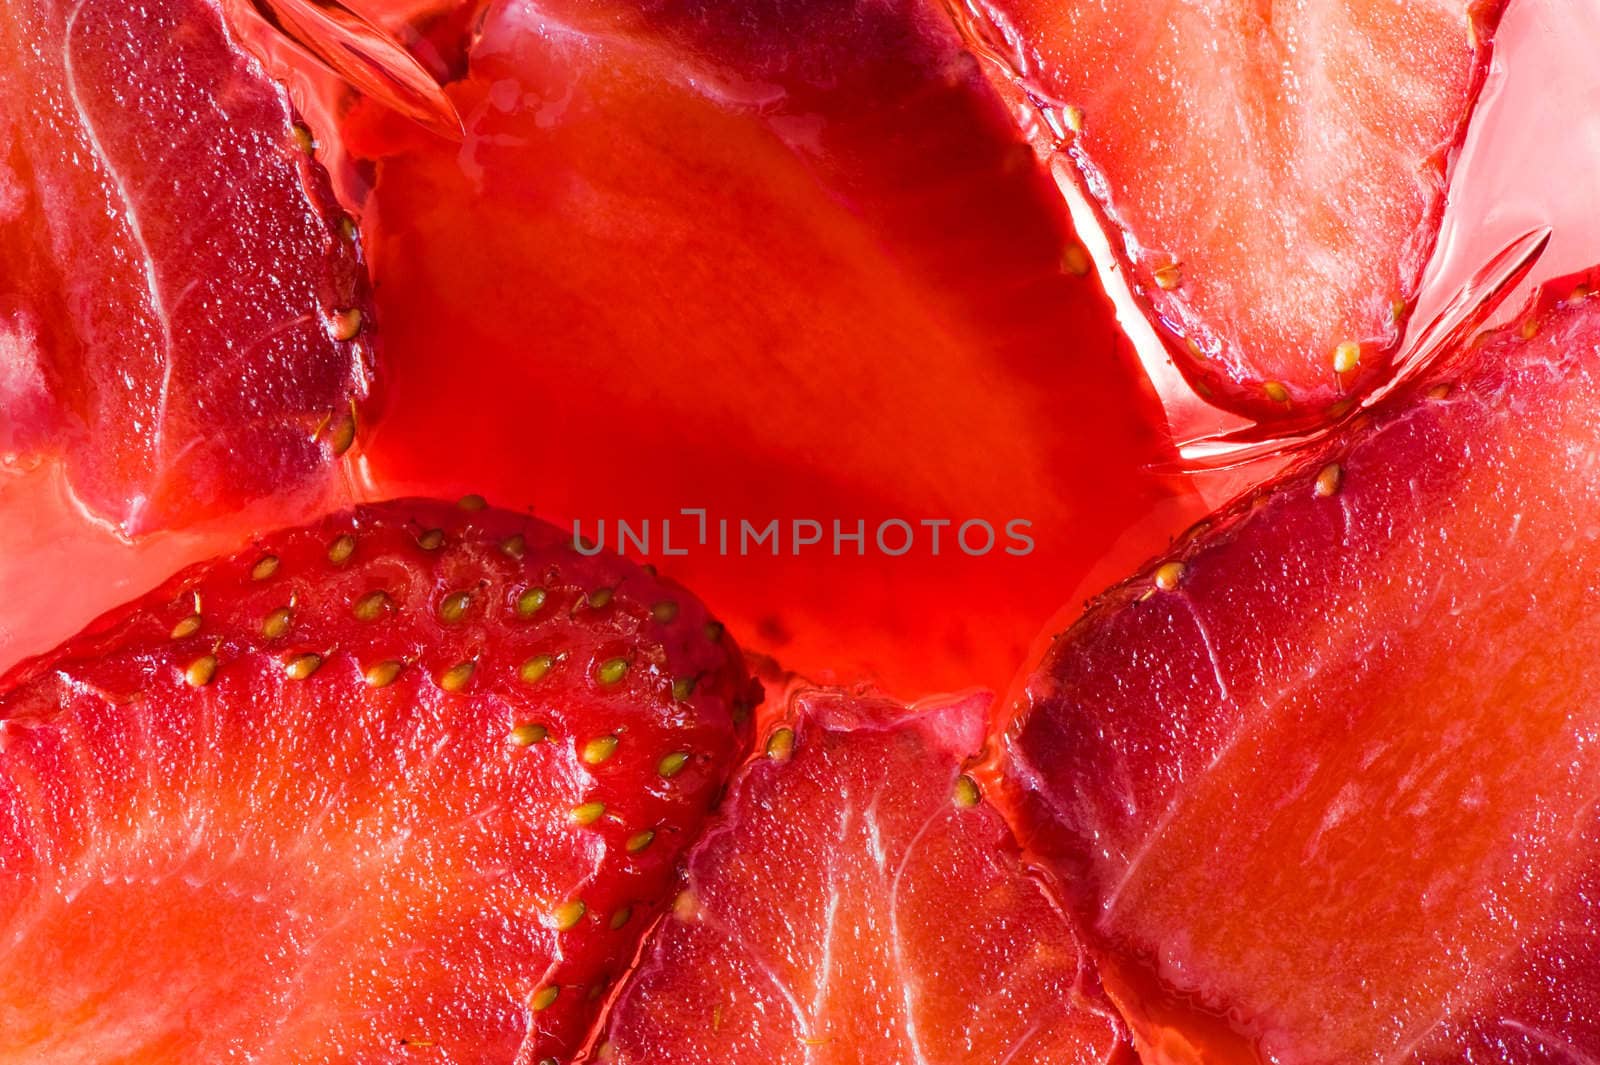 Close-up picture of jelly containing real juicy strawberries